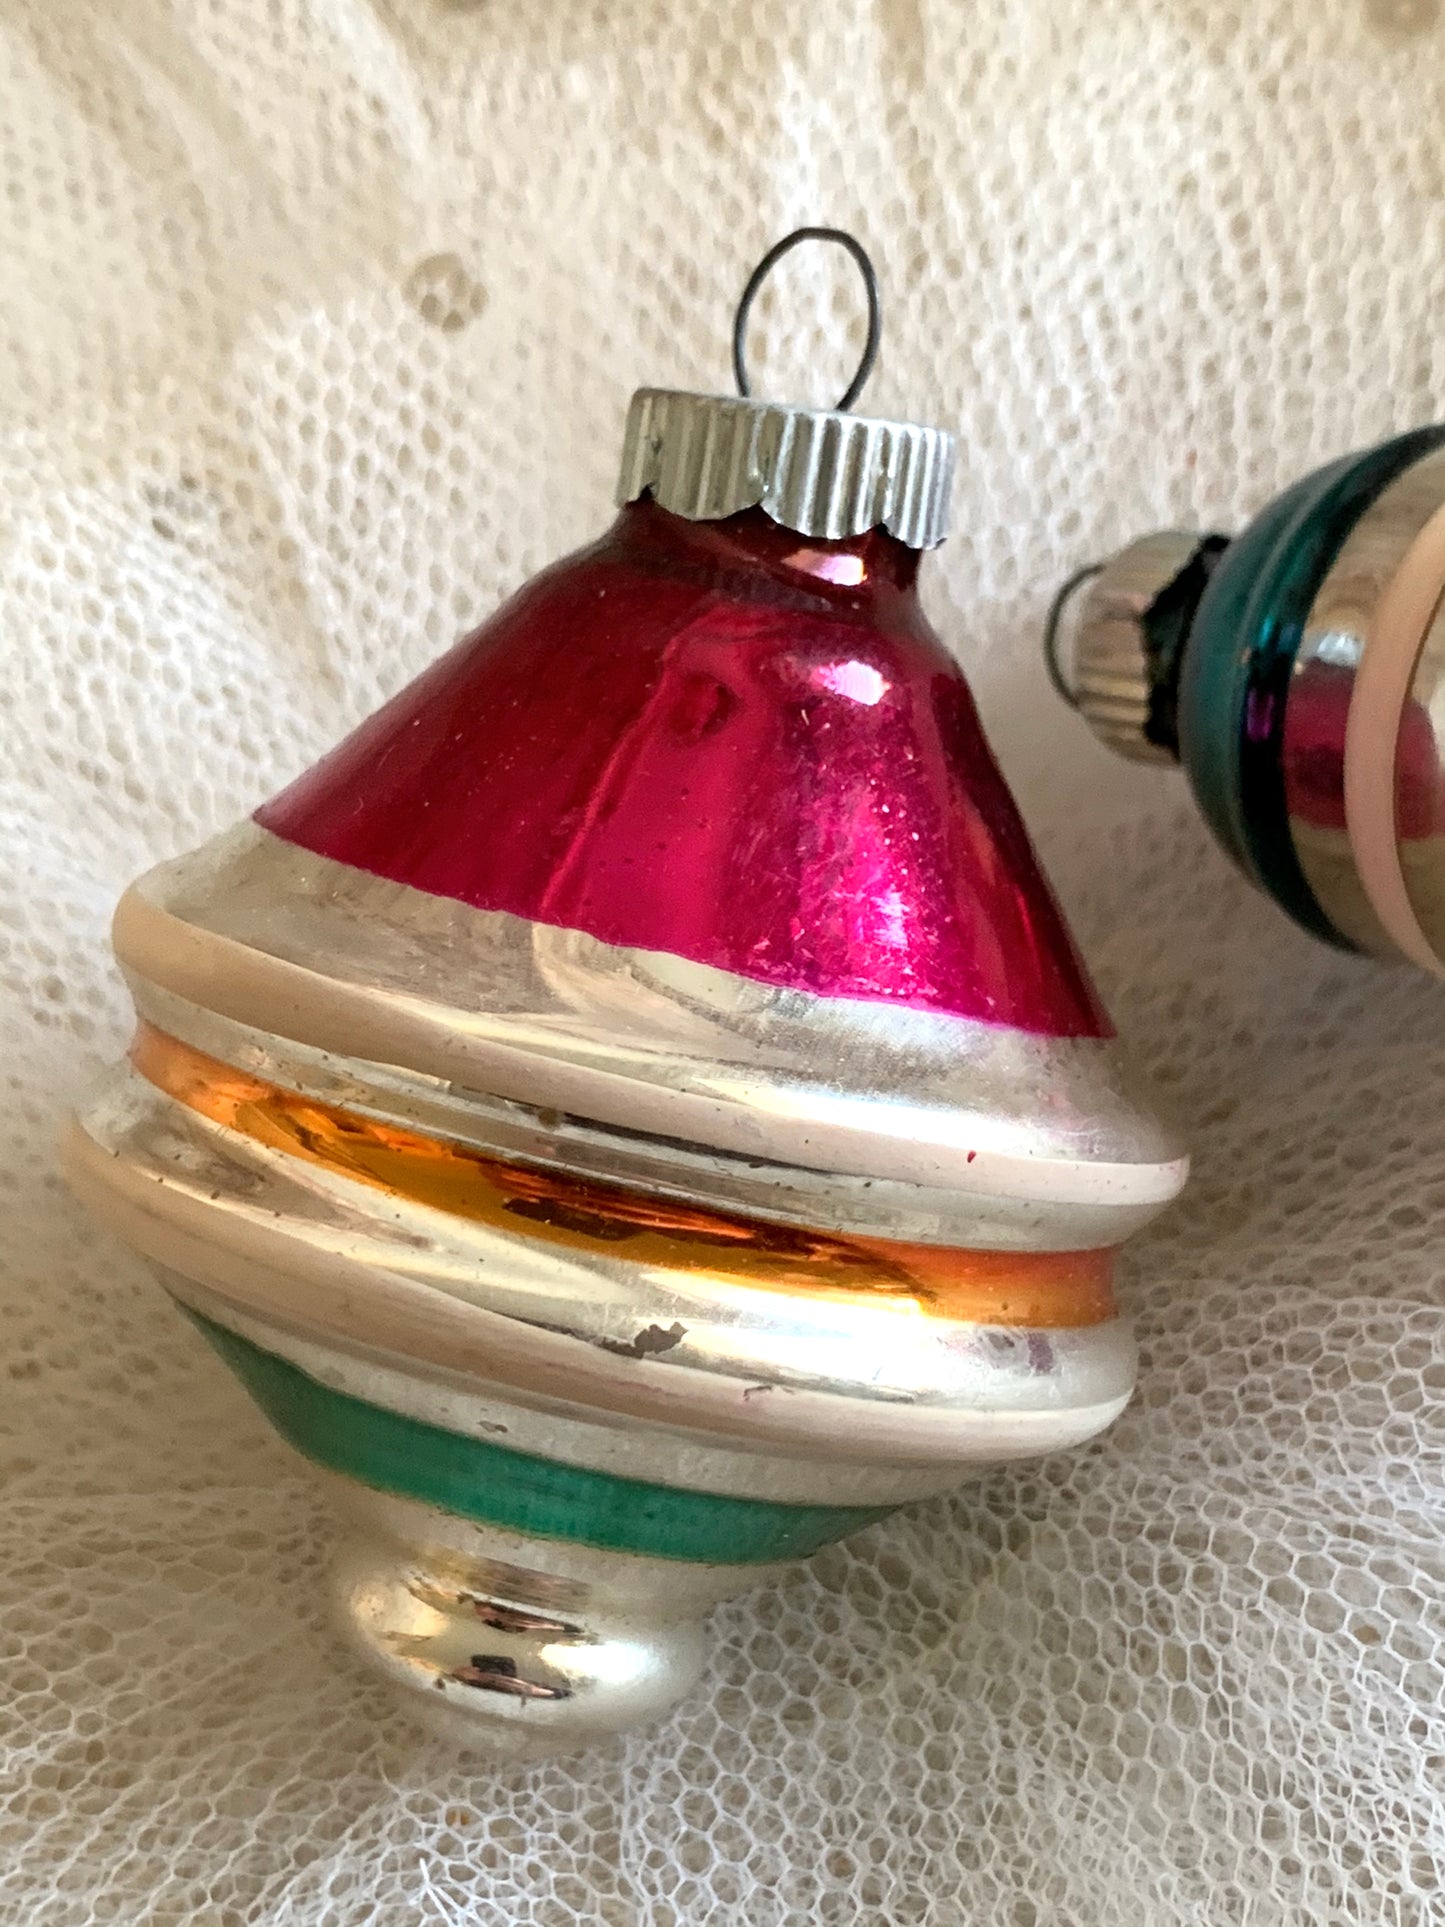 Vintage pair Shiny Brite ufo and bell ornaments